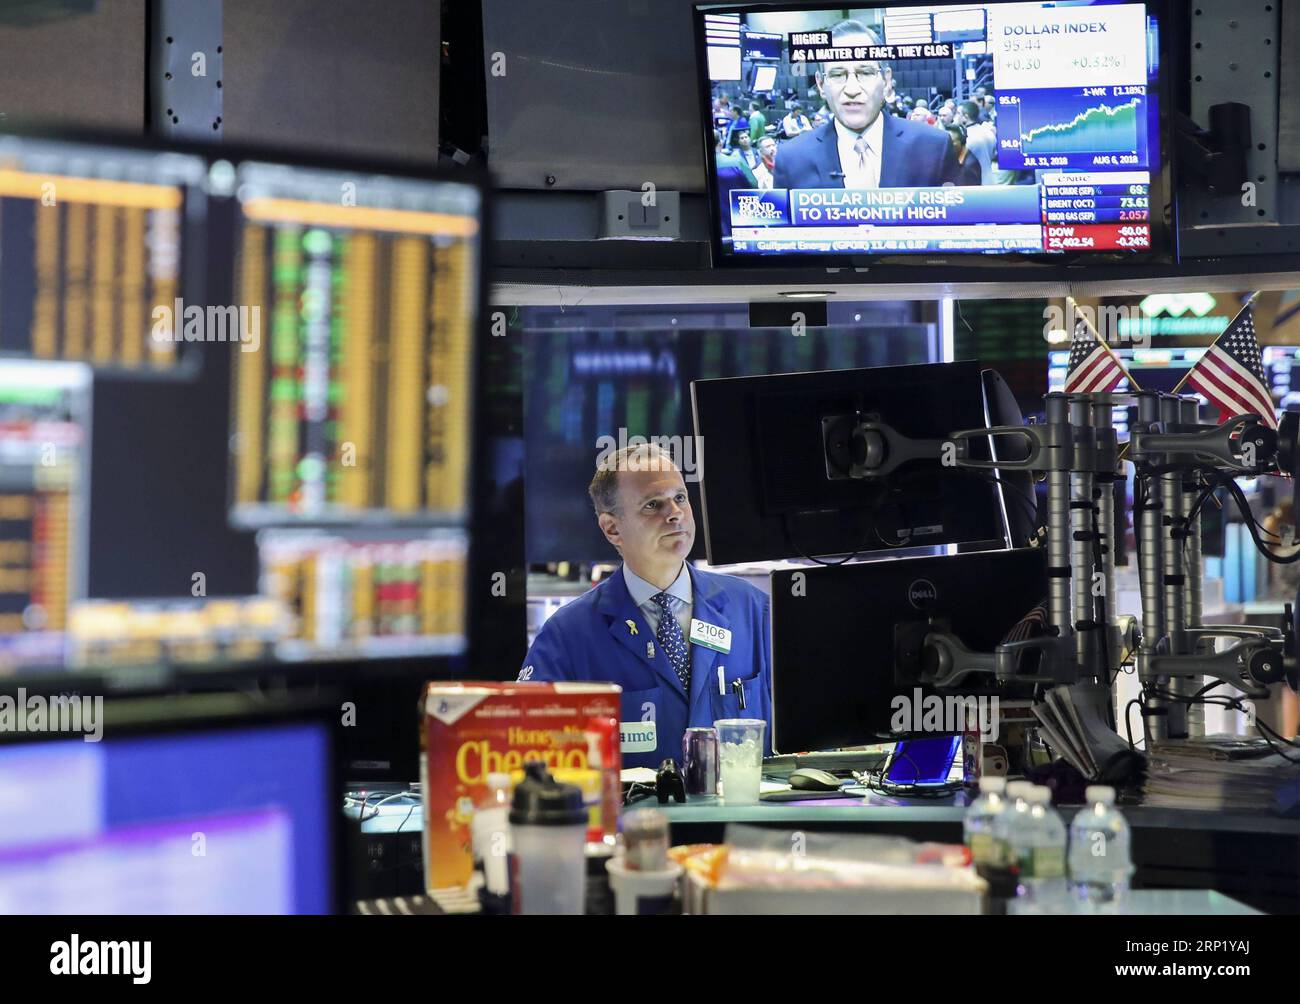 (180806) -- NEW YORK, Aug. 6, 2018 -- A trader works at the New York Stock Exchange in New York, the United States, Aug. 6, 2018. U.S. stocks closed higher on Monday as investors digested a batch of second-quarter corporate earnings reports. The Dow Jones Industrial Average rose 39.60 points, or 0.16 percent, to 25,502.18. The S&P 500 increased 10.05 points, or 0.35 percent, to 2,850.40. The Nasdaq Composite Index rose 47.66 points, or 0.61 percent, to 7,859.68. ) U.S.-NEW YORK-STOCKS WangxYing PUBLICATIONxNOTxINxCHN Stock Photo